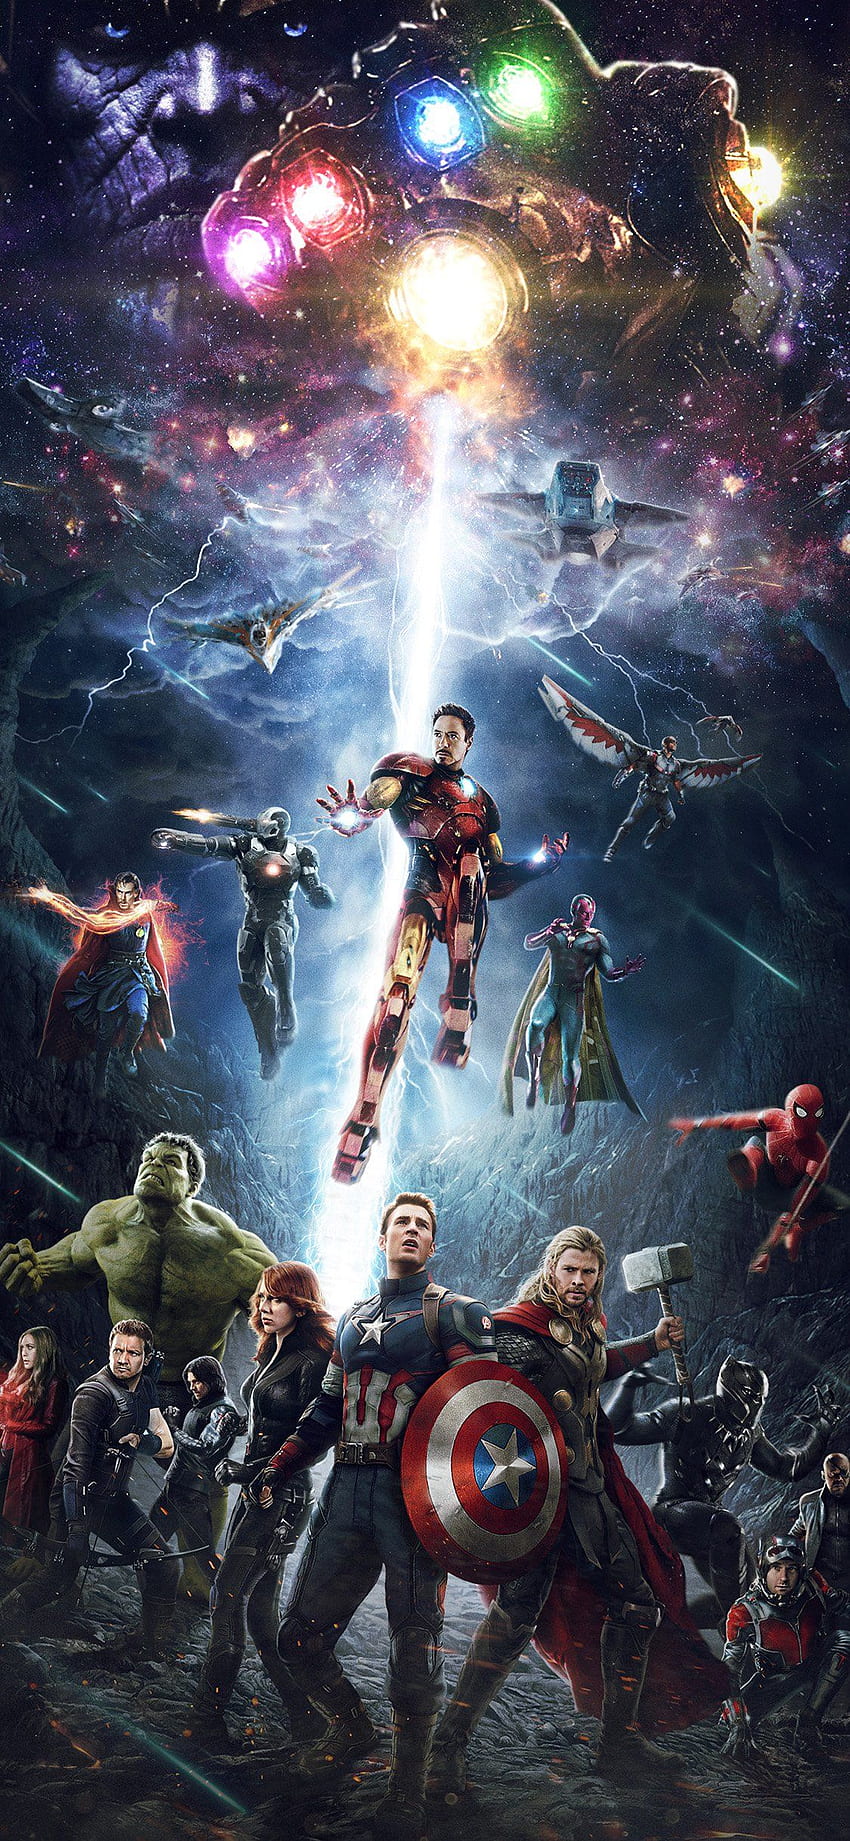 The Avengers wallpaper for iPhone and Android - Avengers, Marvel